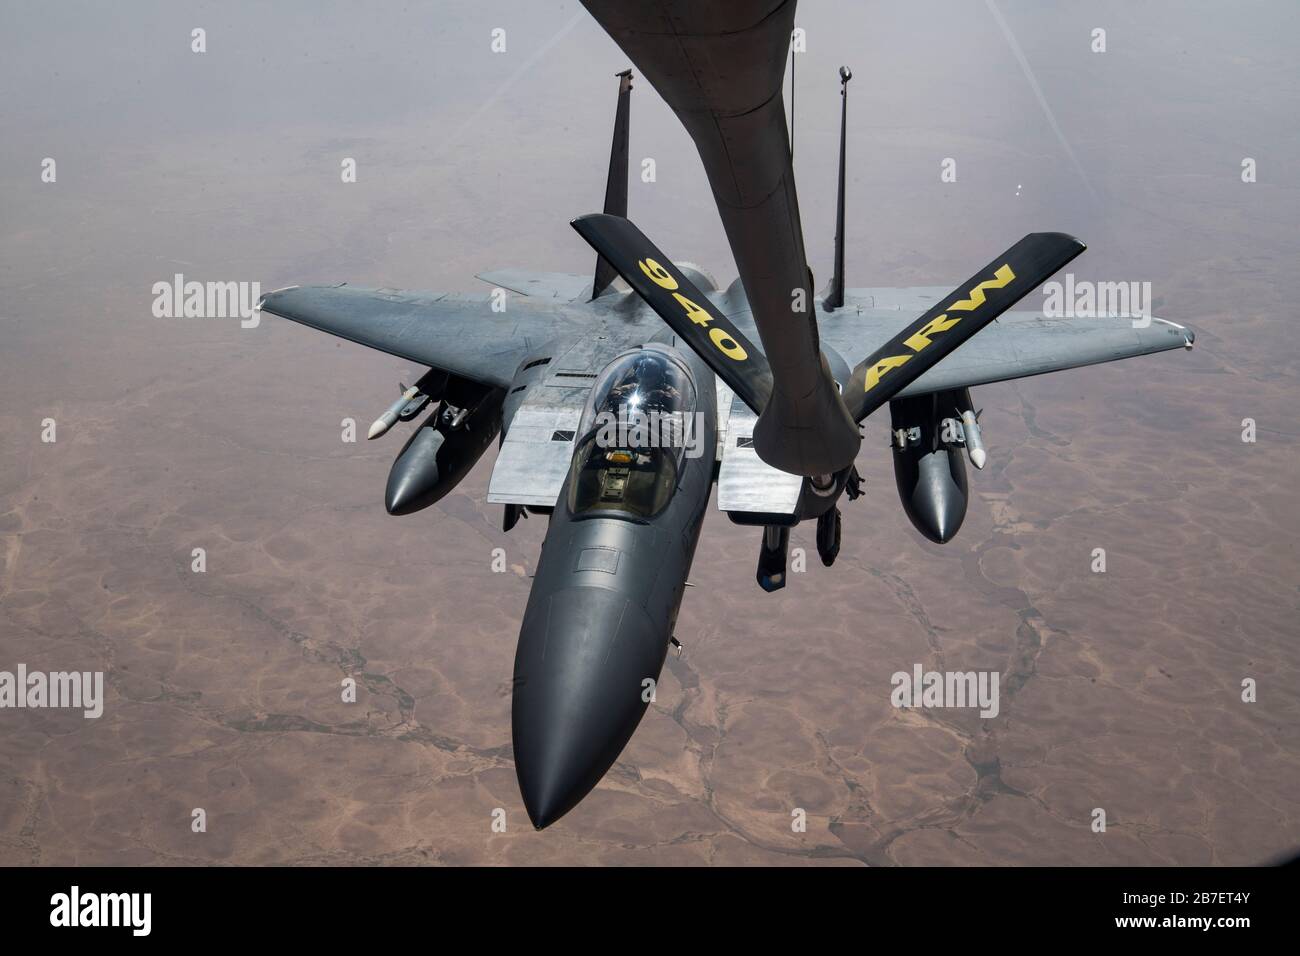 A U.S. Air Force F-15E Strike Eagle approaches a U.S. Air Force KC-135 Stratotanker assigned to the 28th Expeditionary Air Refueling Squadron, to conduct an aerial refueling over Iraq, March 11, 2020. The F-15E is a dual-role fighter designed to perform air-to-air and air-to-air ground missions, demonstrating U.S. Air Forces Central Commands' posture to compete, deter, and win against state and non-state actors. (U.S. Air Force photo by Tech. Sgt. Matthew Lotz) Stock Photo